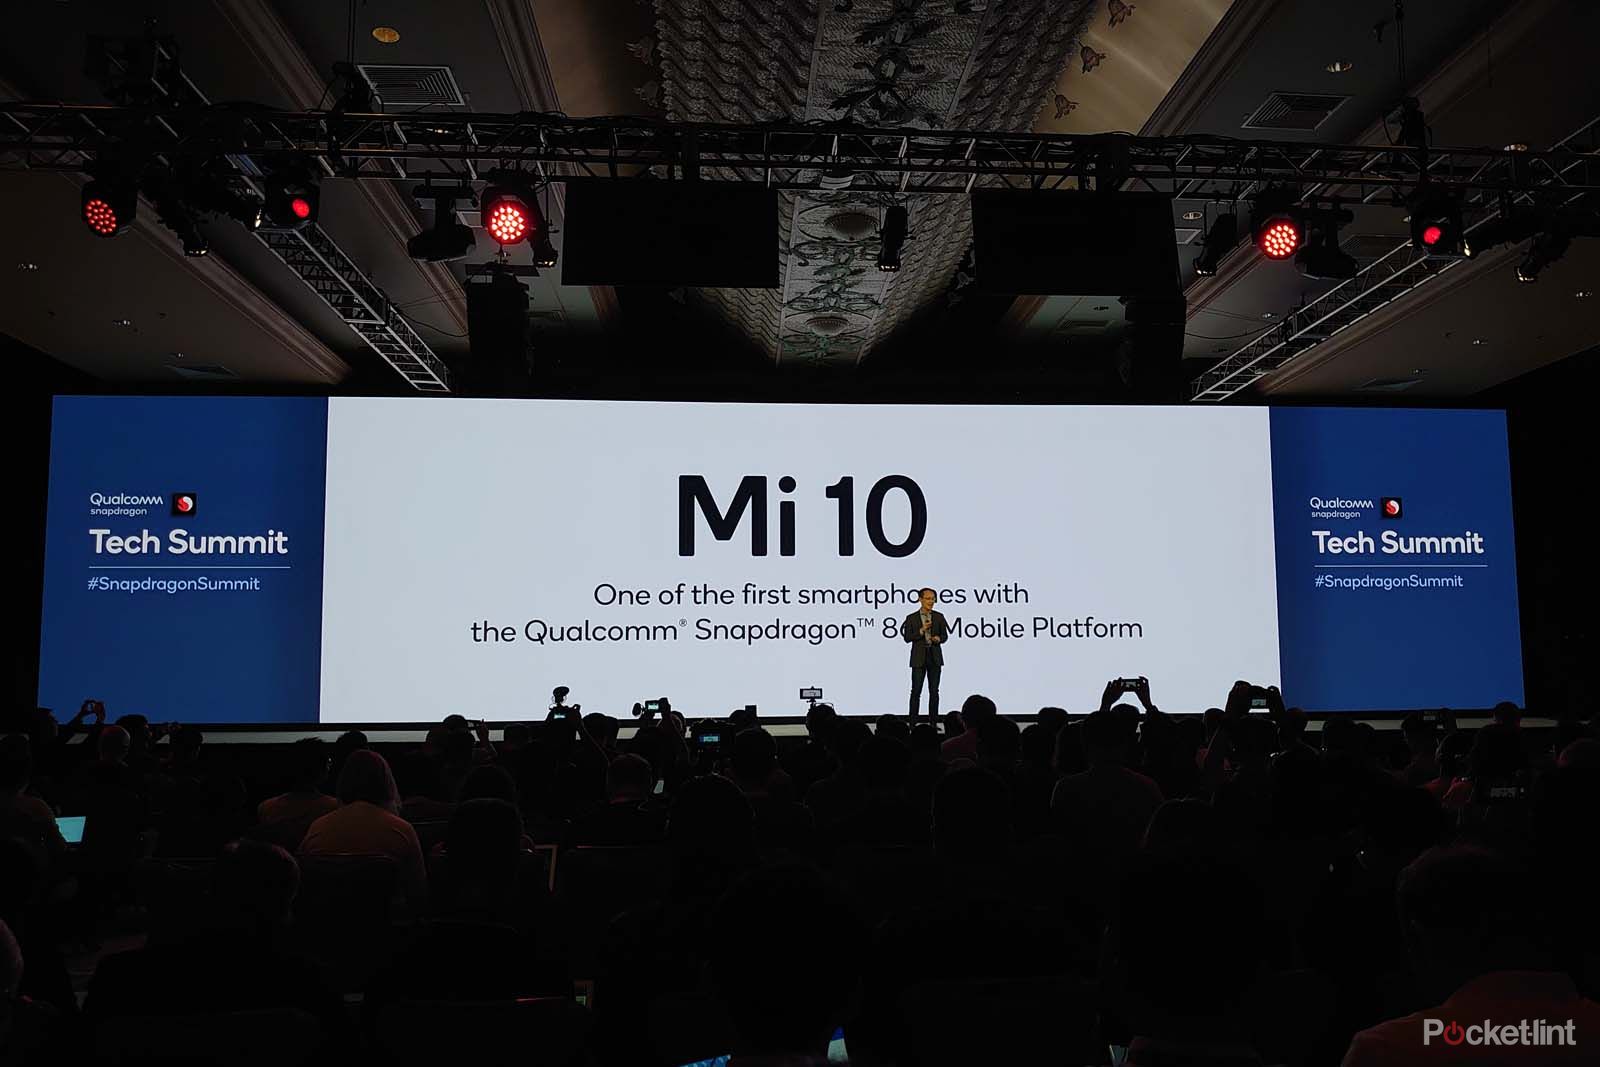 Xiaomi Mi 10 will be one of the first Snapdragon 865 phones image 1